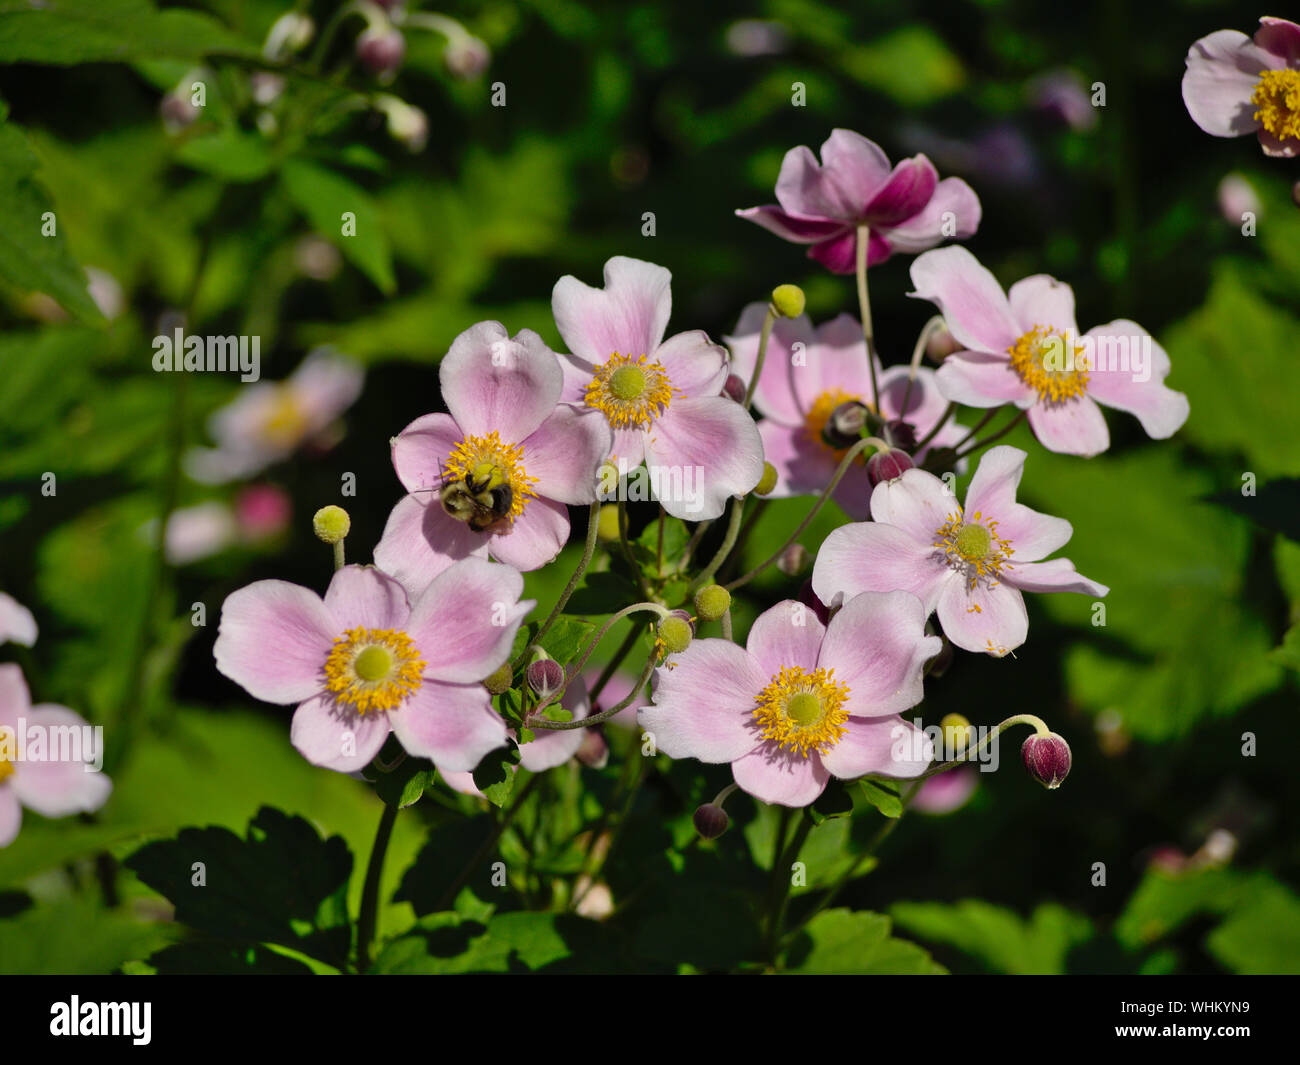 Pink Japanese anemone (Anemone hupehensis) flowers being accosted by bees in the late afternoon summer sun, Ottawa, Ontario, Canada. Stock Photo